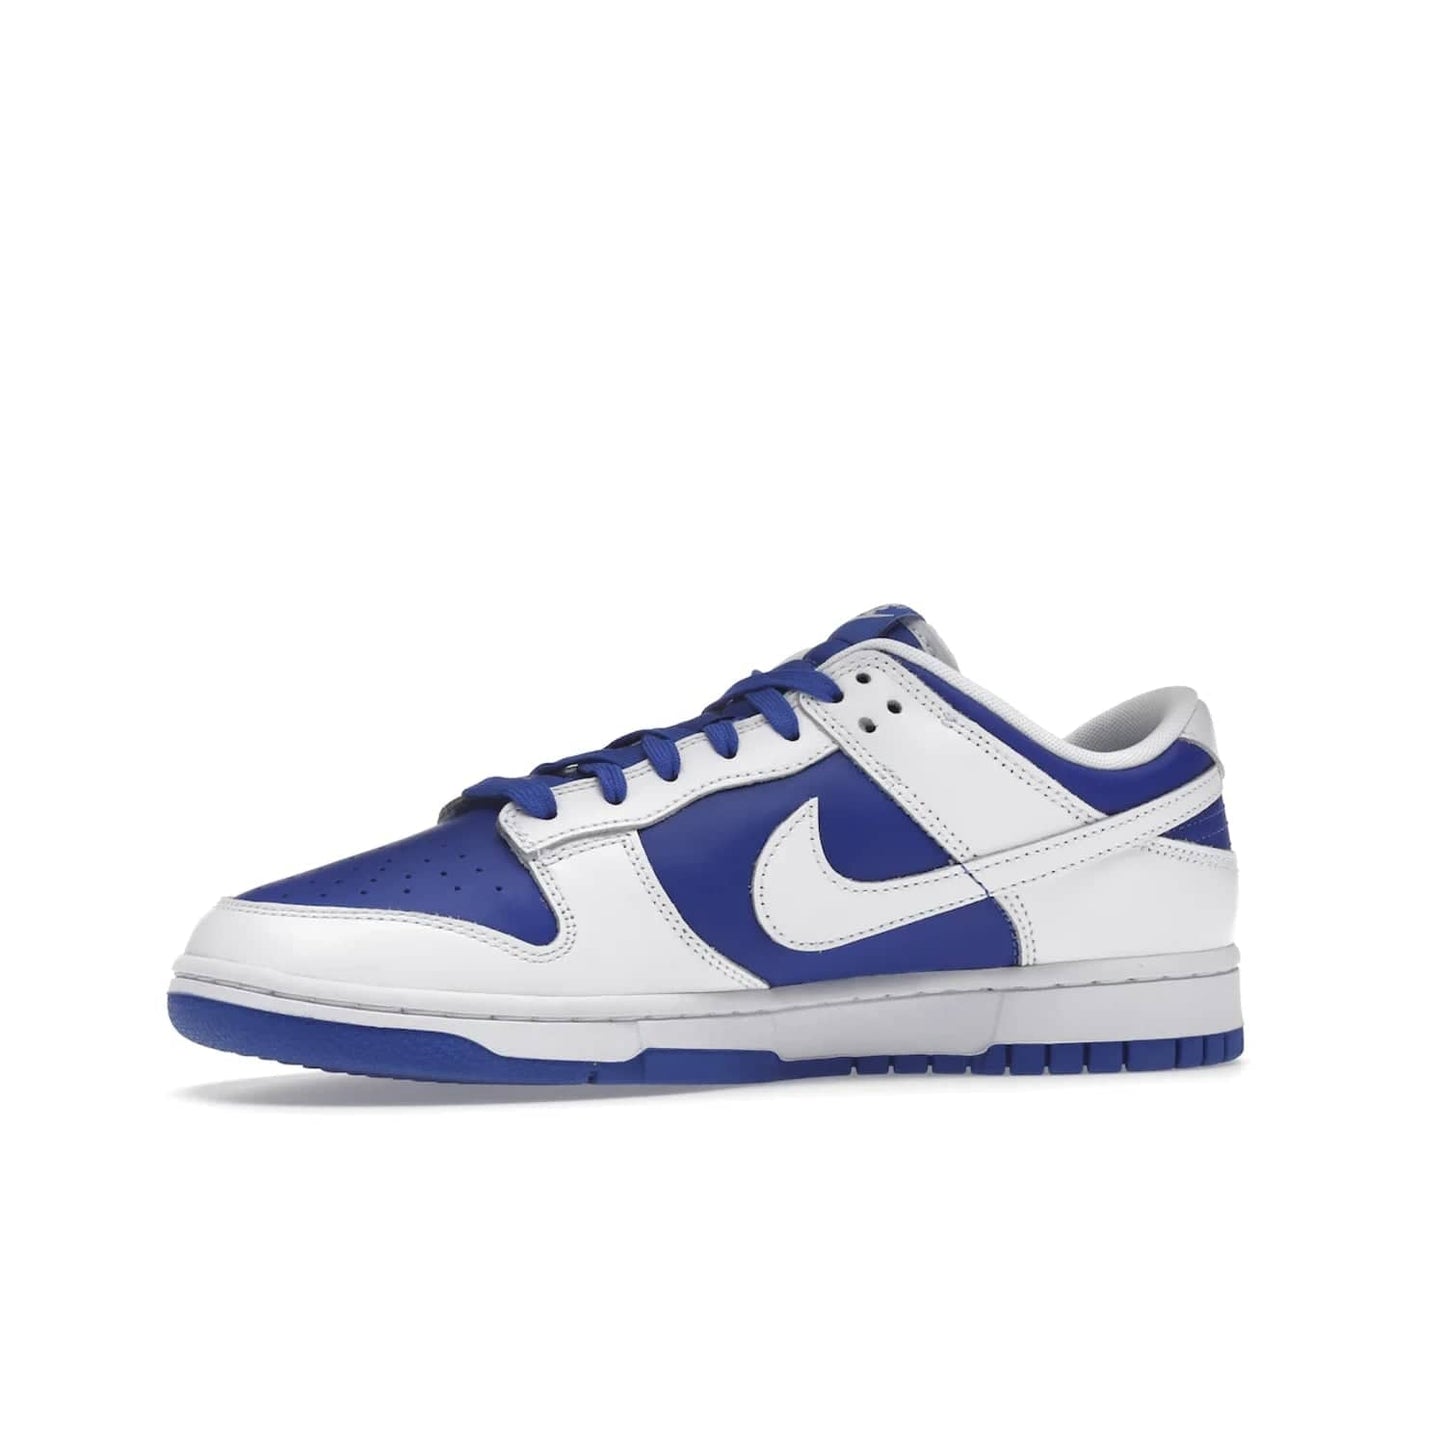 Nike Dunk Low Racer Blue White - Image 17 - Only at www.BallersClubKickz.com - Sleek Racer Blue leather upper and white leather overlays make up the Nike Dunk Low Racer Blue White. Woven tag and heel embroidery for a 1985 Dunk look with a matching EVA foam sole completes the classic colorway.